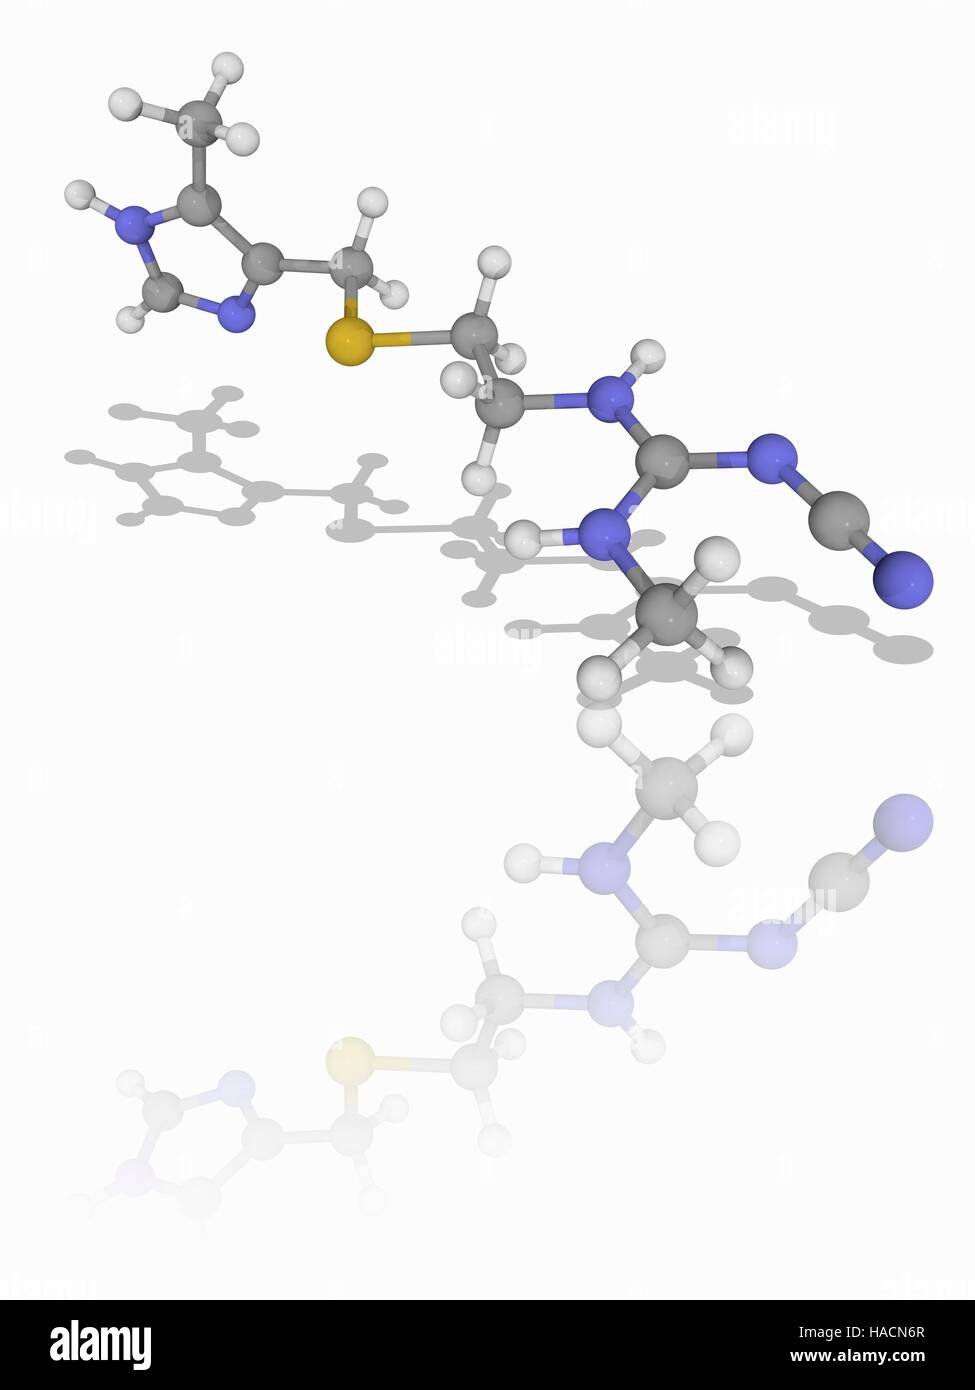 Cimetidine. Molecular model of the drug cimetidine (C10.H16.N6.S), used to treat heartburn and peptic ulcers. It is a histamine H2-receptor antagonist, inhibiting the production of acid in the stomach. Atoms are represented as spheres and are colour-coded: carbon (grey), hydrogen (white), nitrogen (blue) and sulphur (yellow). Illustration. Stock Photo